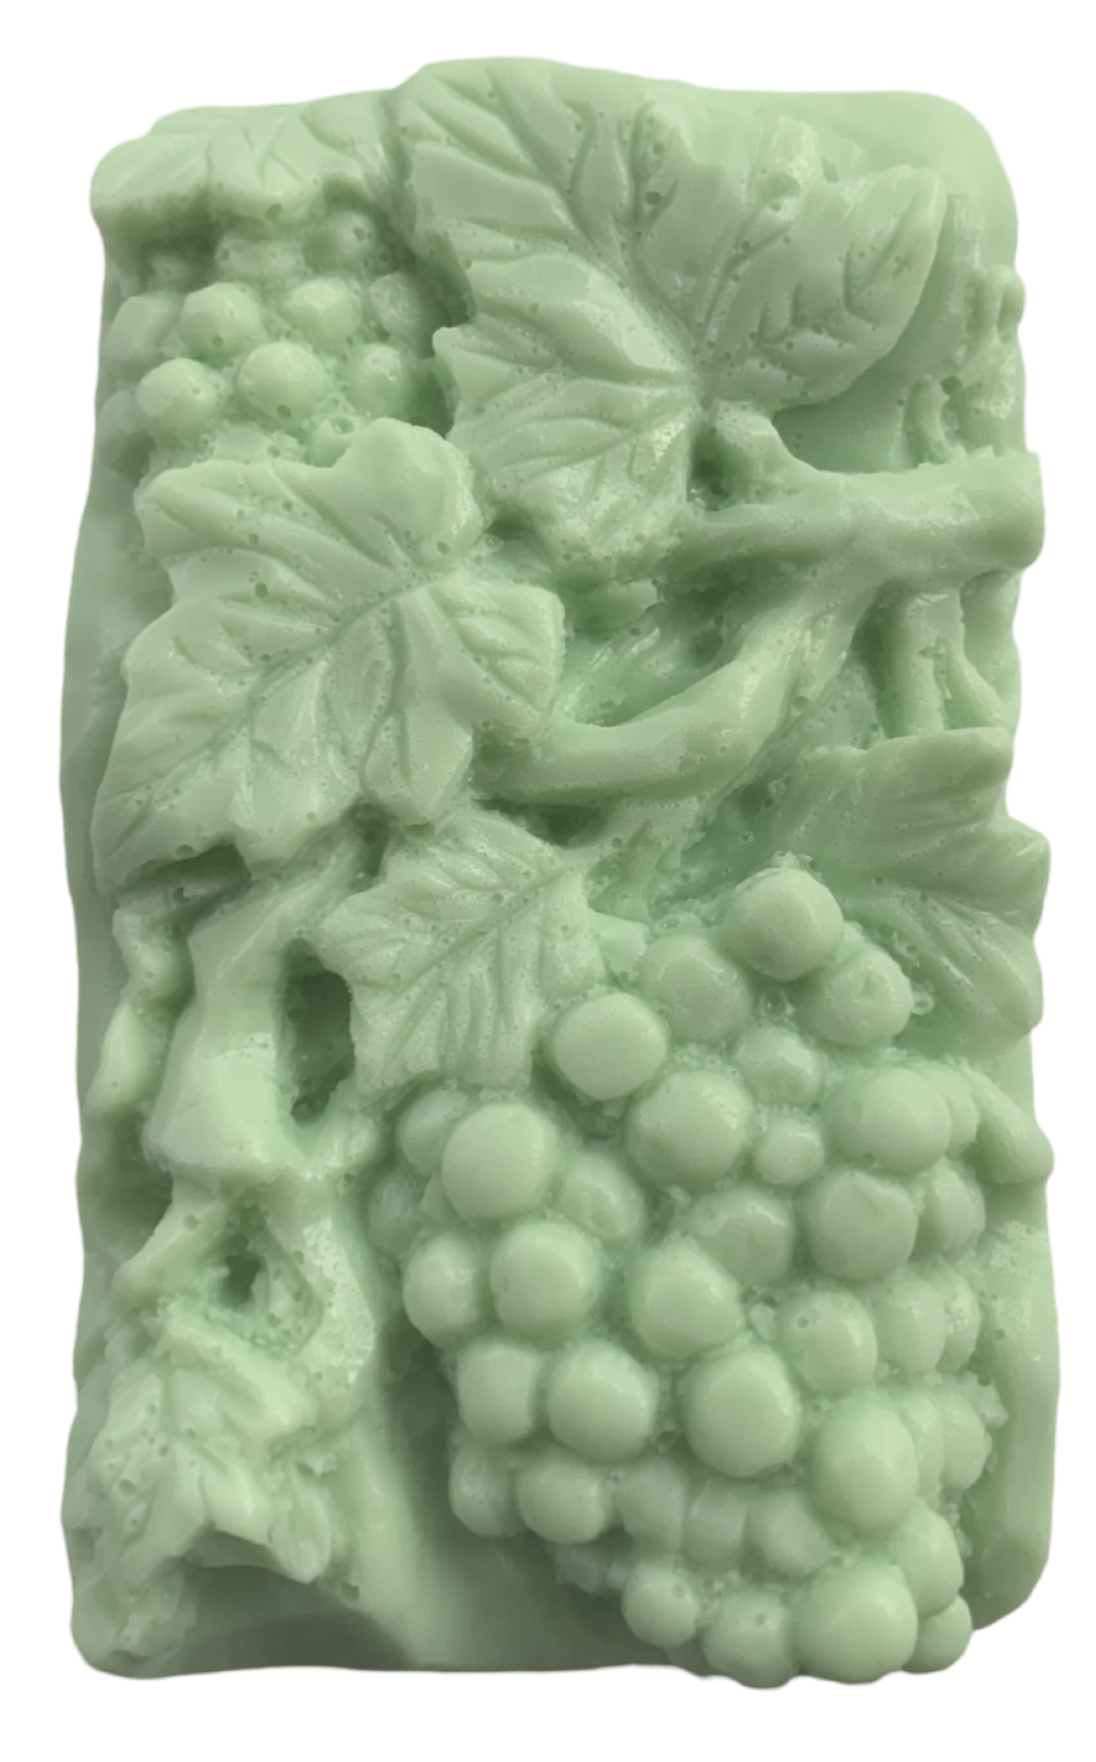 Cluster of Grapes Bar of soap